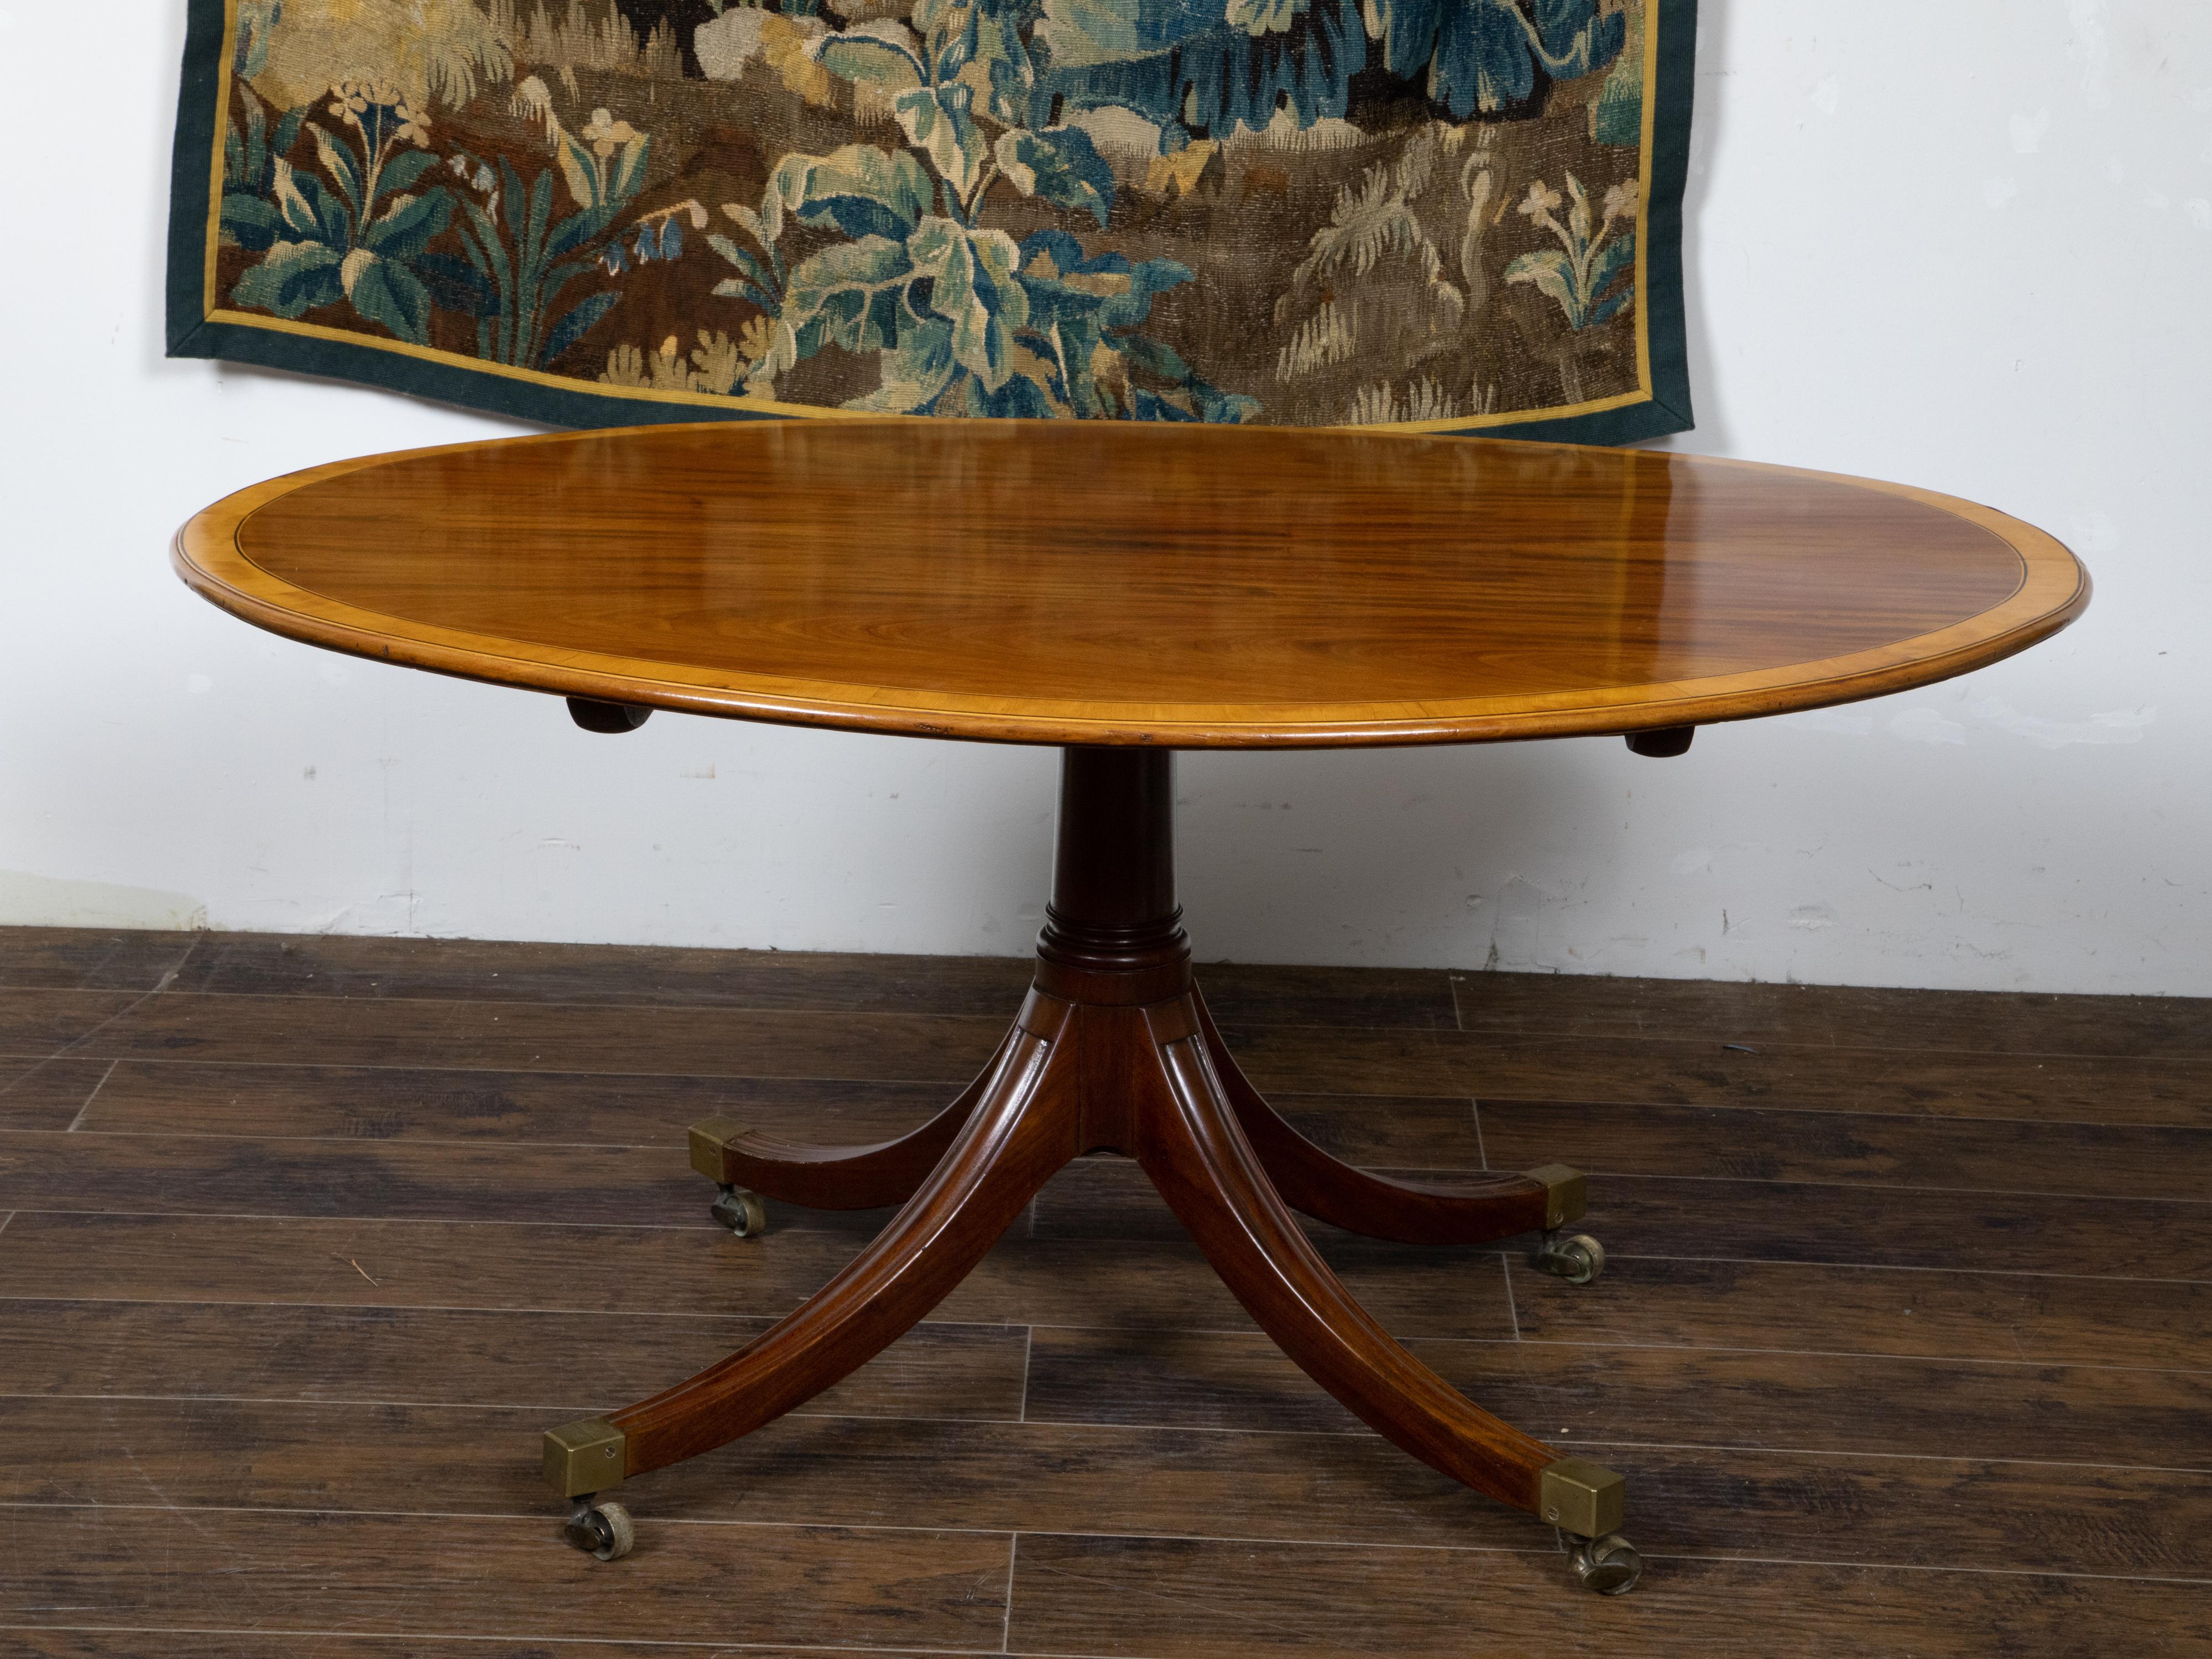 Cross-Banded English Mahogany 1840s Oval Top Pedestal Table with Quadripod Base and Casters For Sale